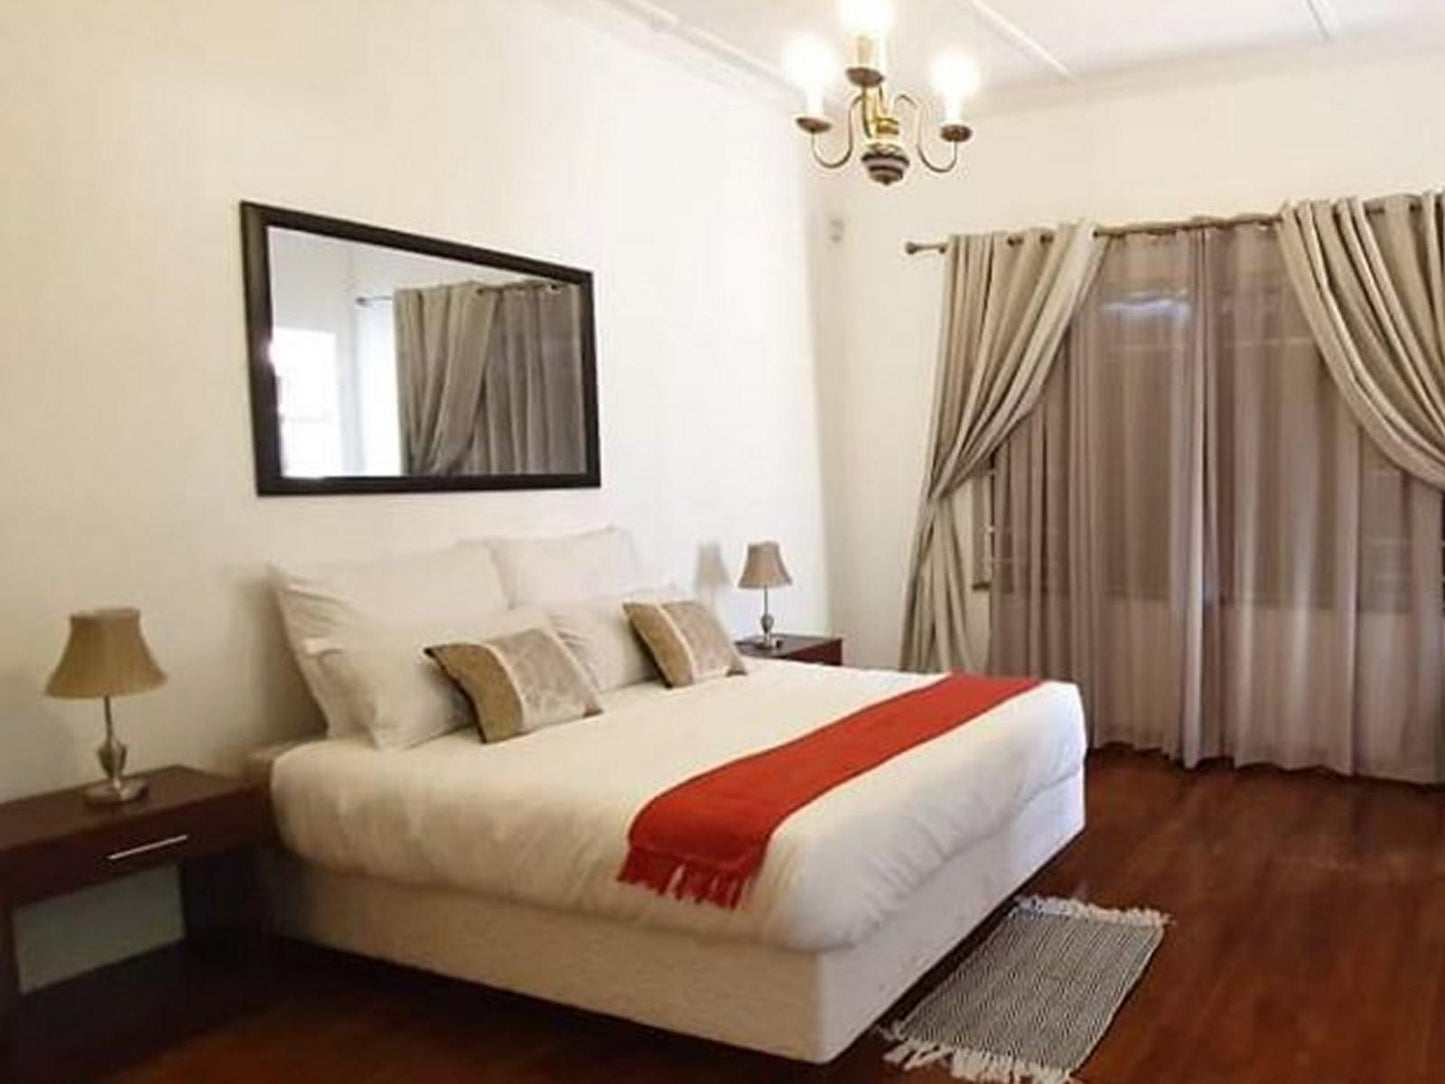 Double Room @ Union Guest House